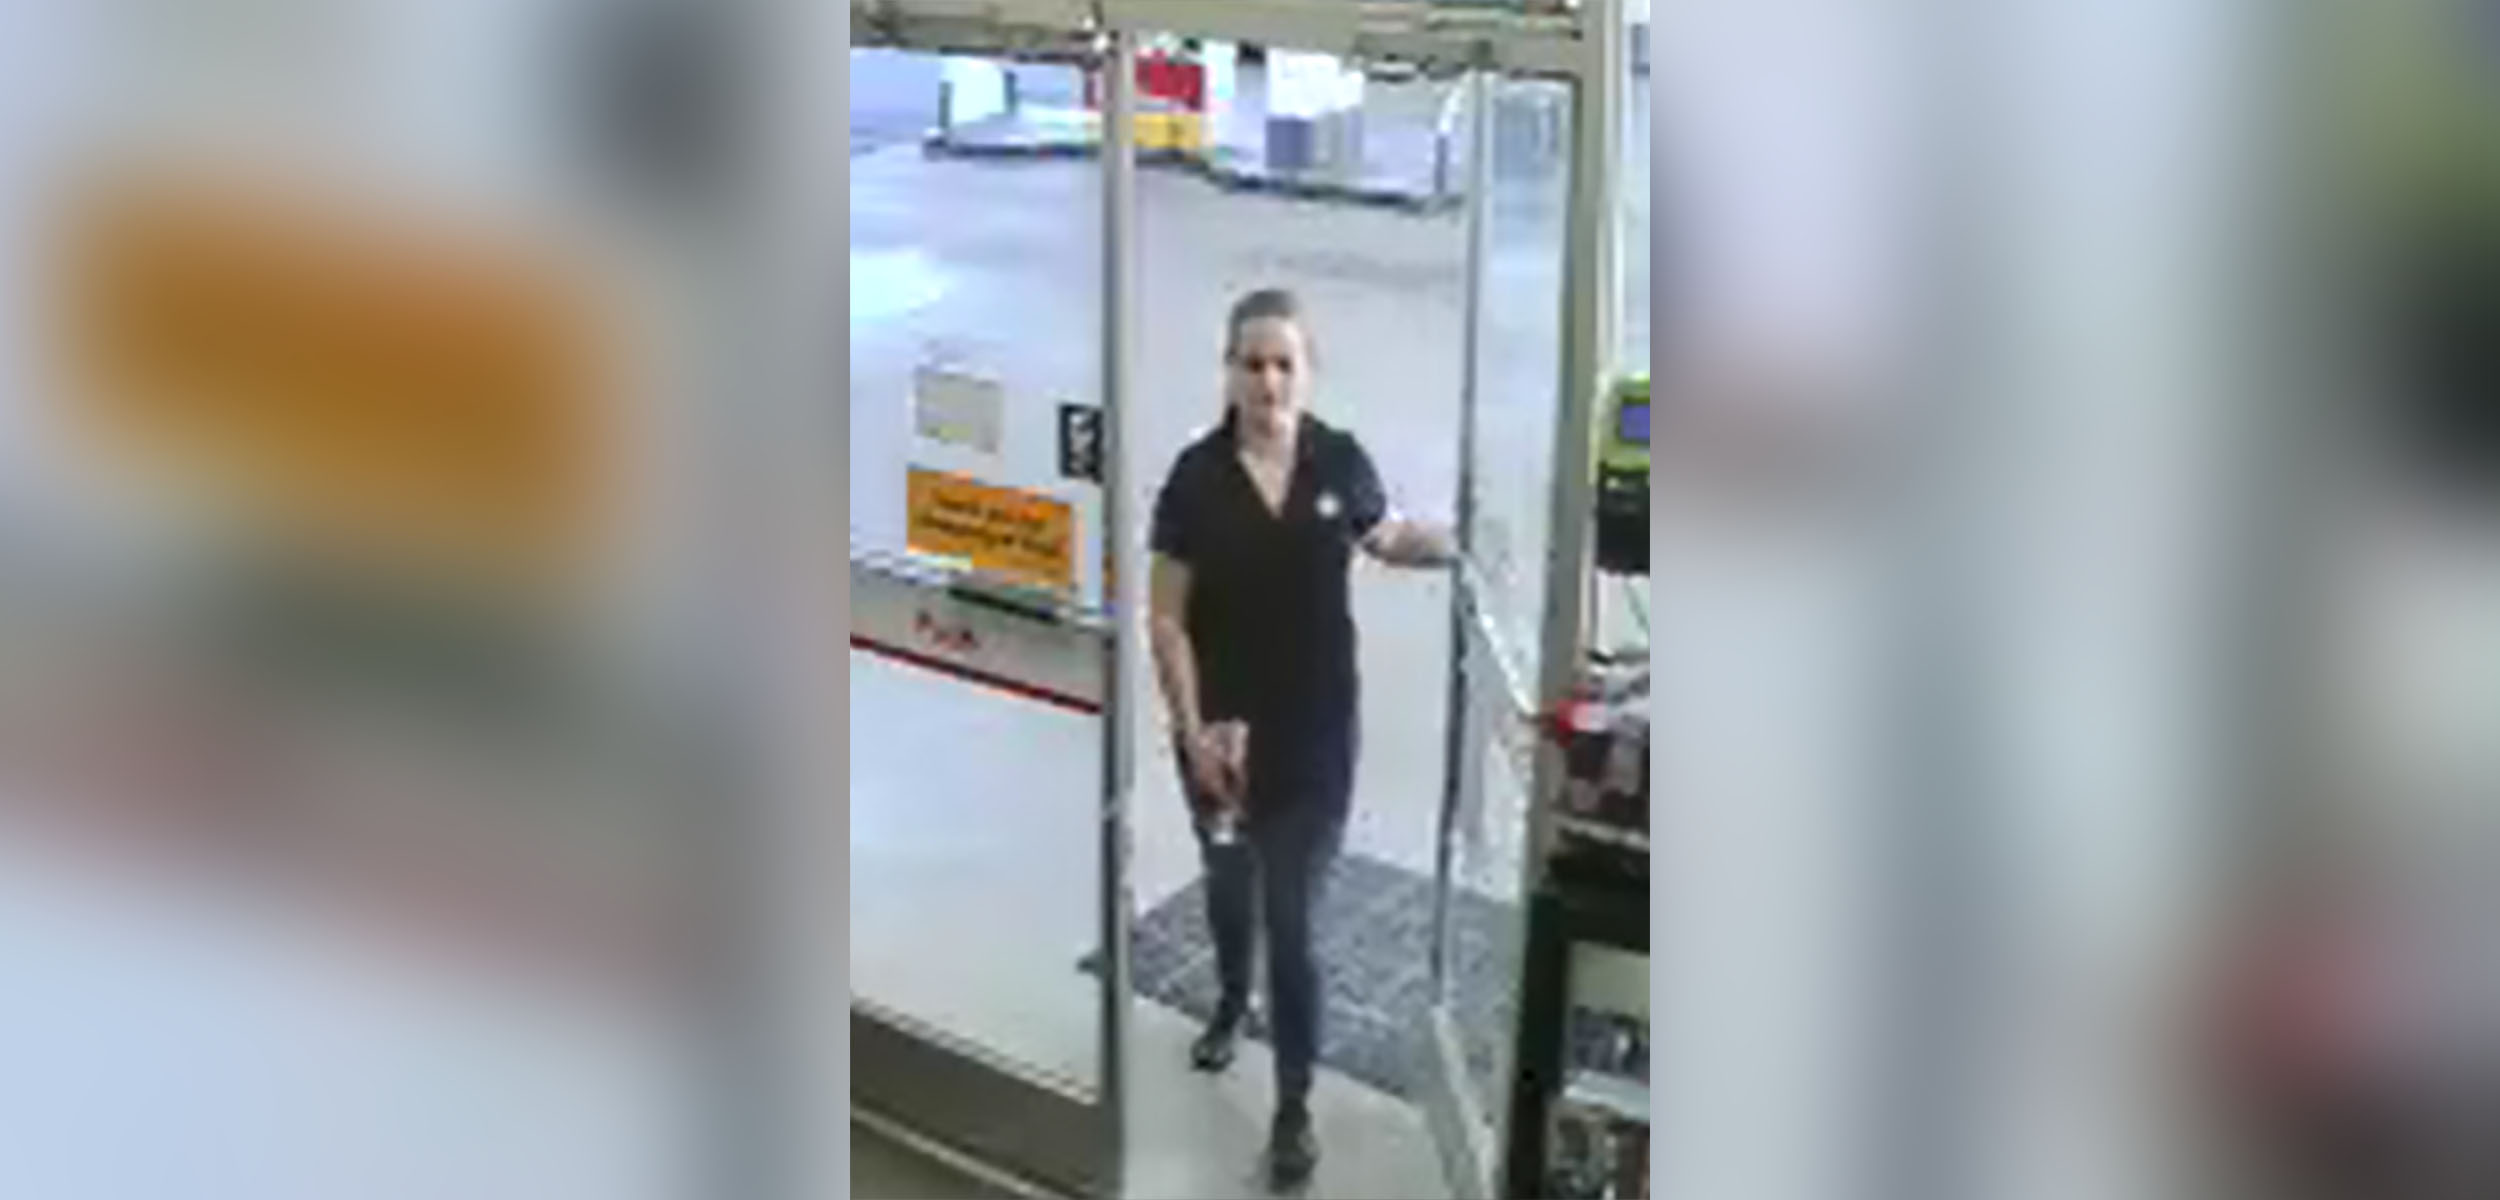 PHOTO: Surveillance cameras captured Allison Cope at a Shell gas station in Wake Forest, N.C., at approximately 4:15 p.m. ET on June 26, 2017.
